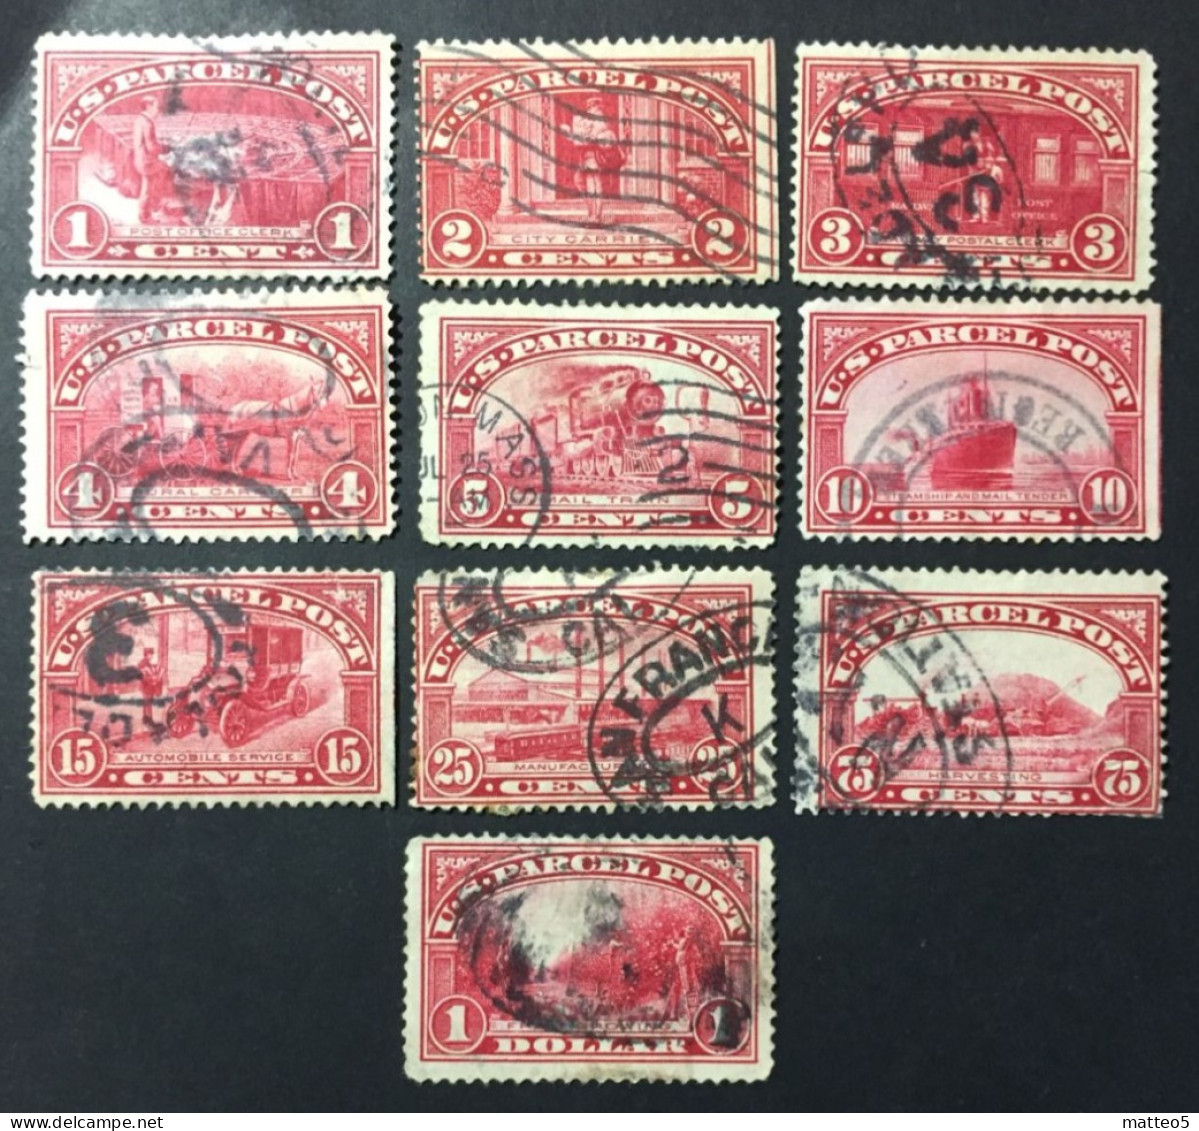 1912 - United States - Parcel Post Colonies Postage Due With - 10 Stamps - Used - Servizio